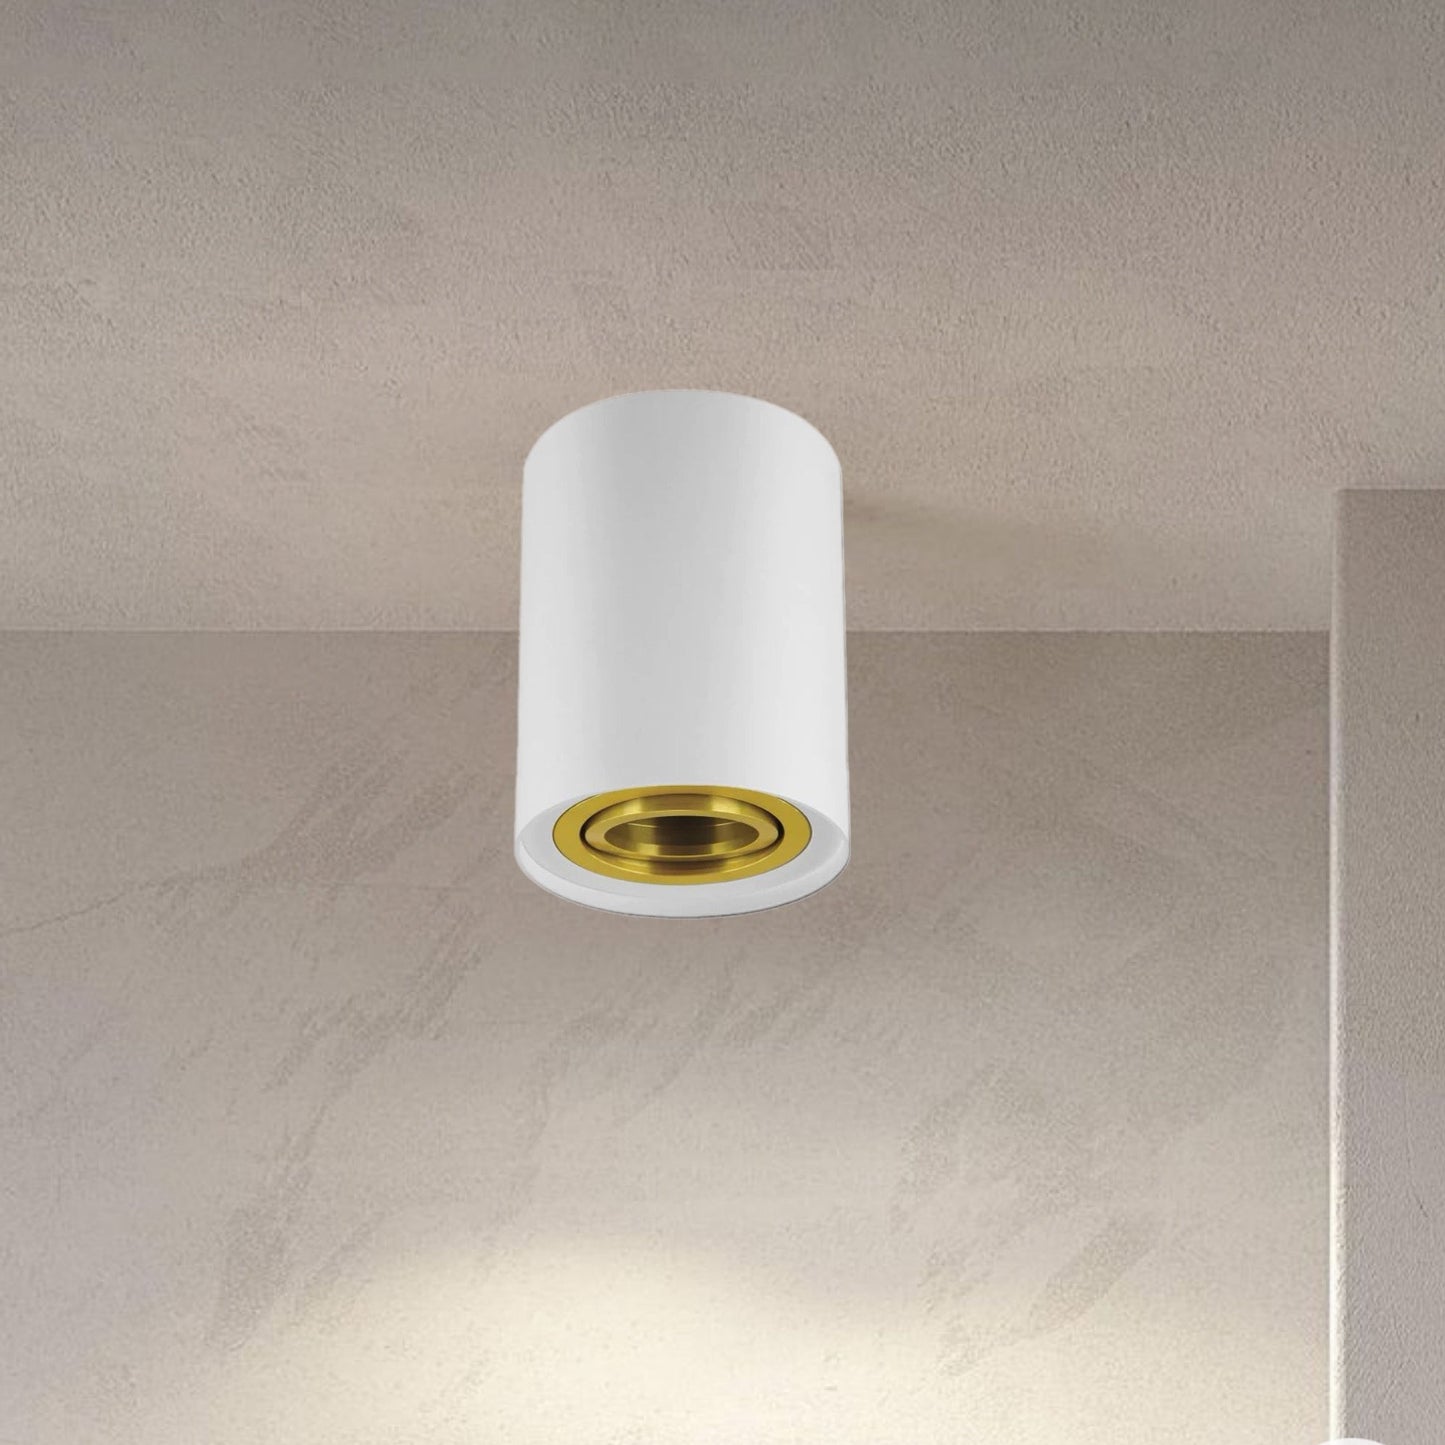 Our Prince adjustable ceiling spot light has a sleek and modern circular design with a powder coated exterior and gold interior. A simple, white ceiling spotlight is a perfect complement to classic or modern interiors. Ideal for the kitchen, dining room, bedroom, or living room. It has an IP20 rating, indicating that it is dustproof.